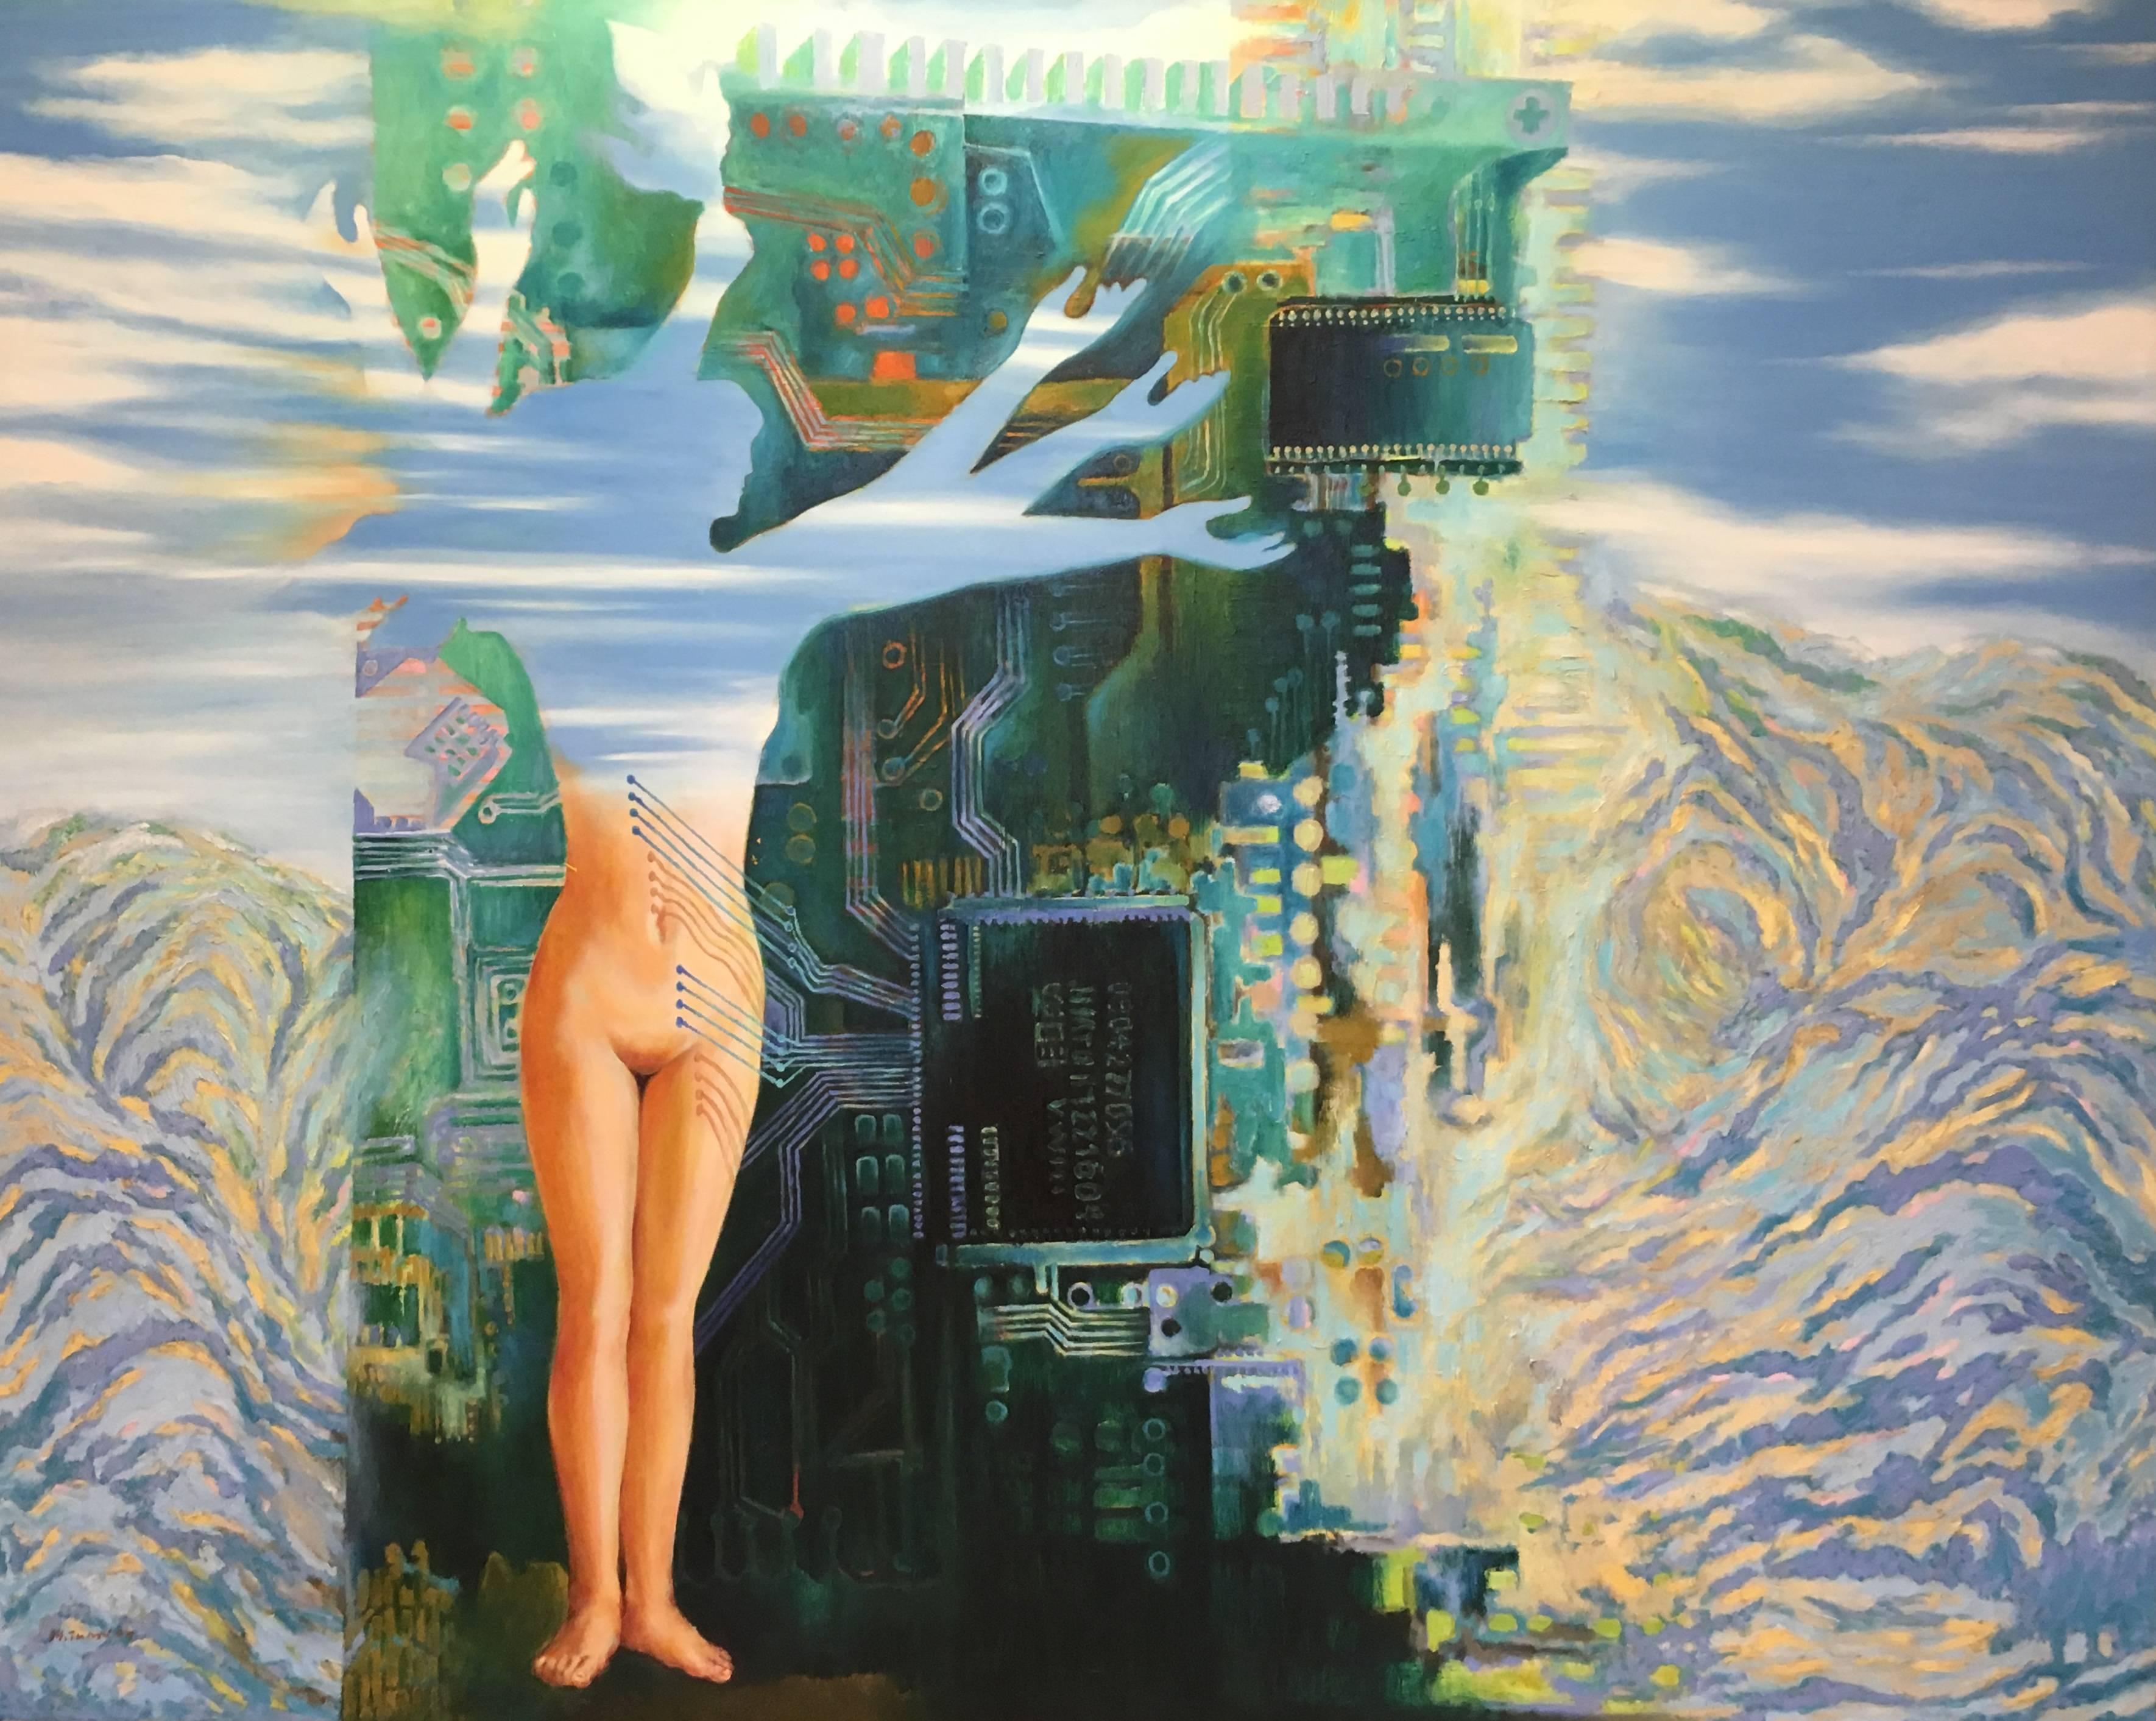 Pham Minh Tuan Figurative Painting - "Convention and Eternity" Oil on Canvas Surreal Blue Green 